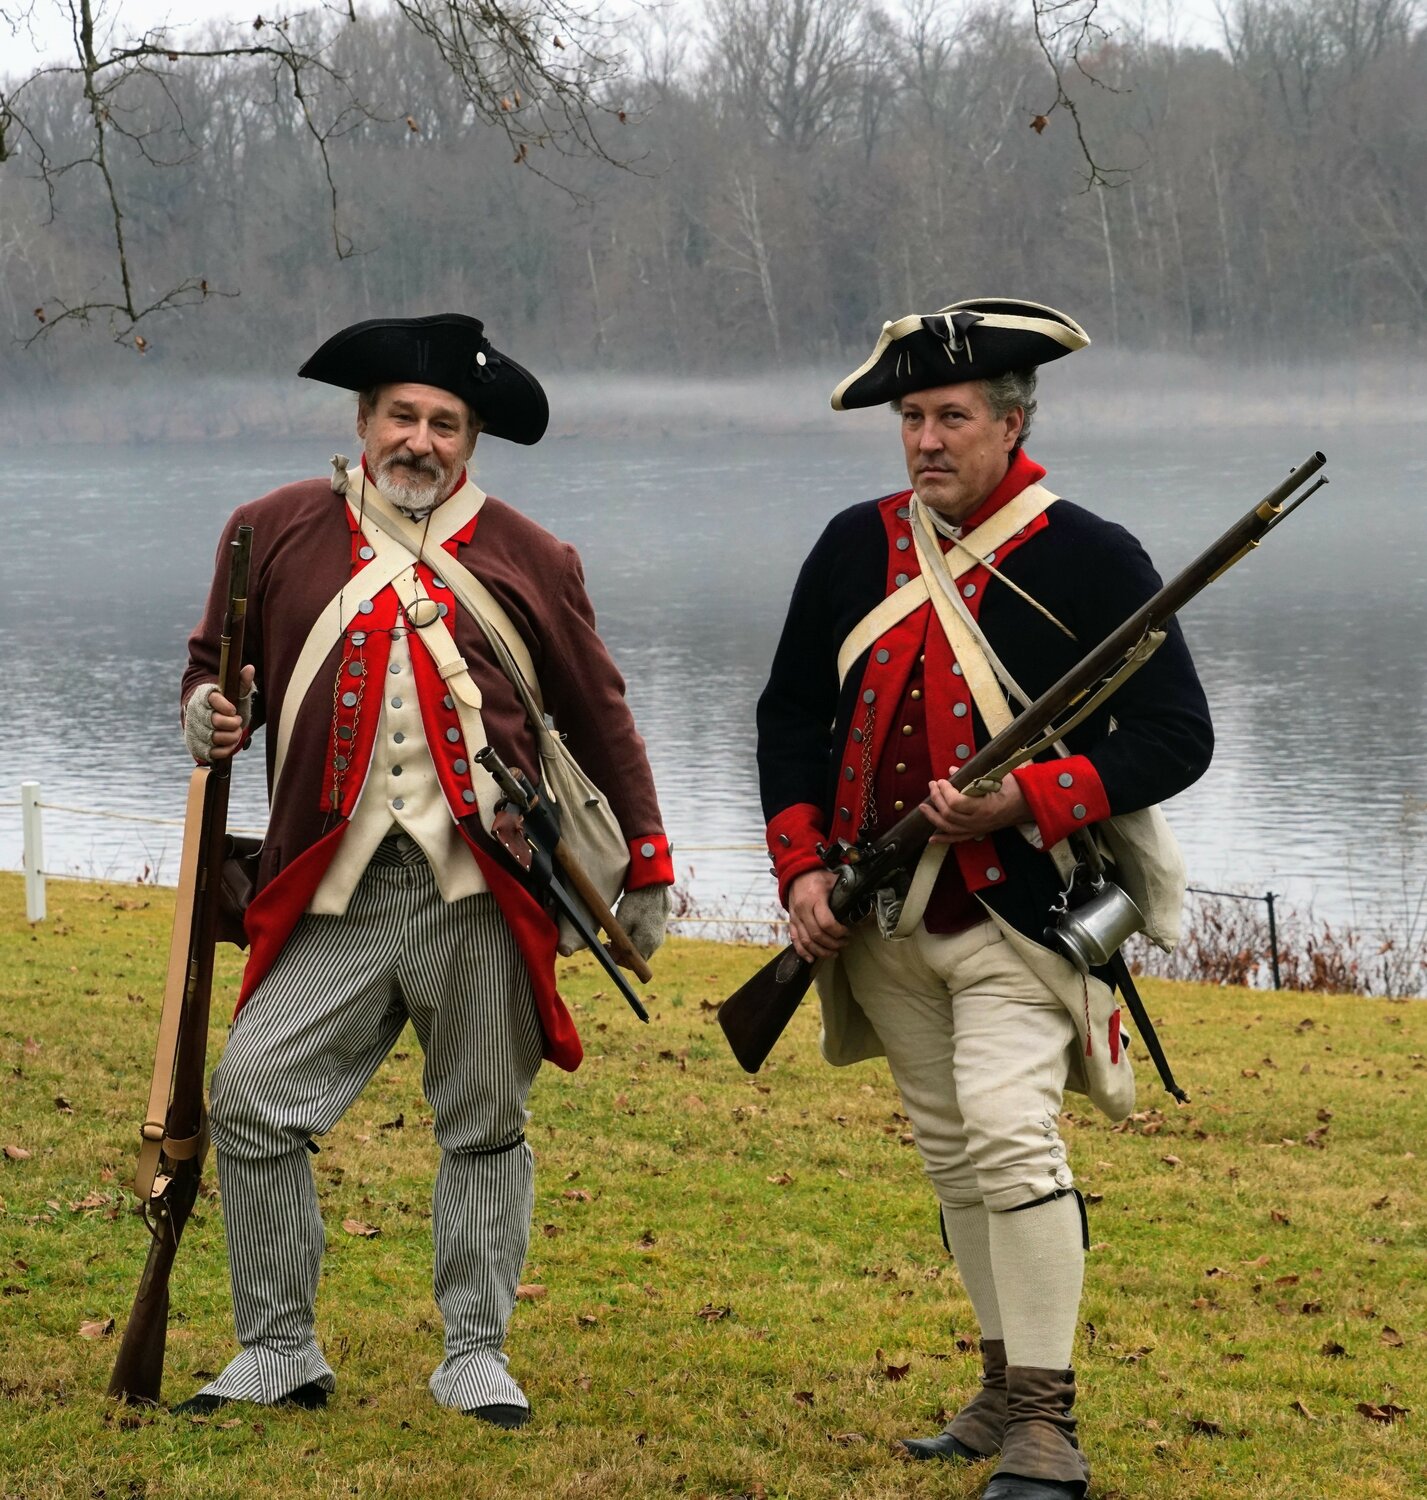 Gary Hellman and Randell Spackman stand on the shores of the Delaware River during Sunday’s reenactment of George Washington’s famous 1776 river crossing.